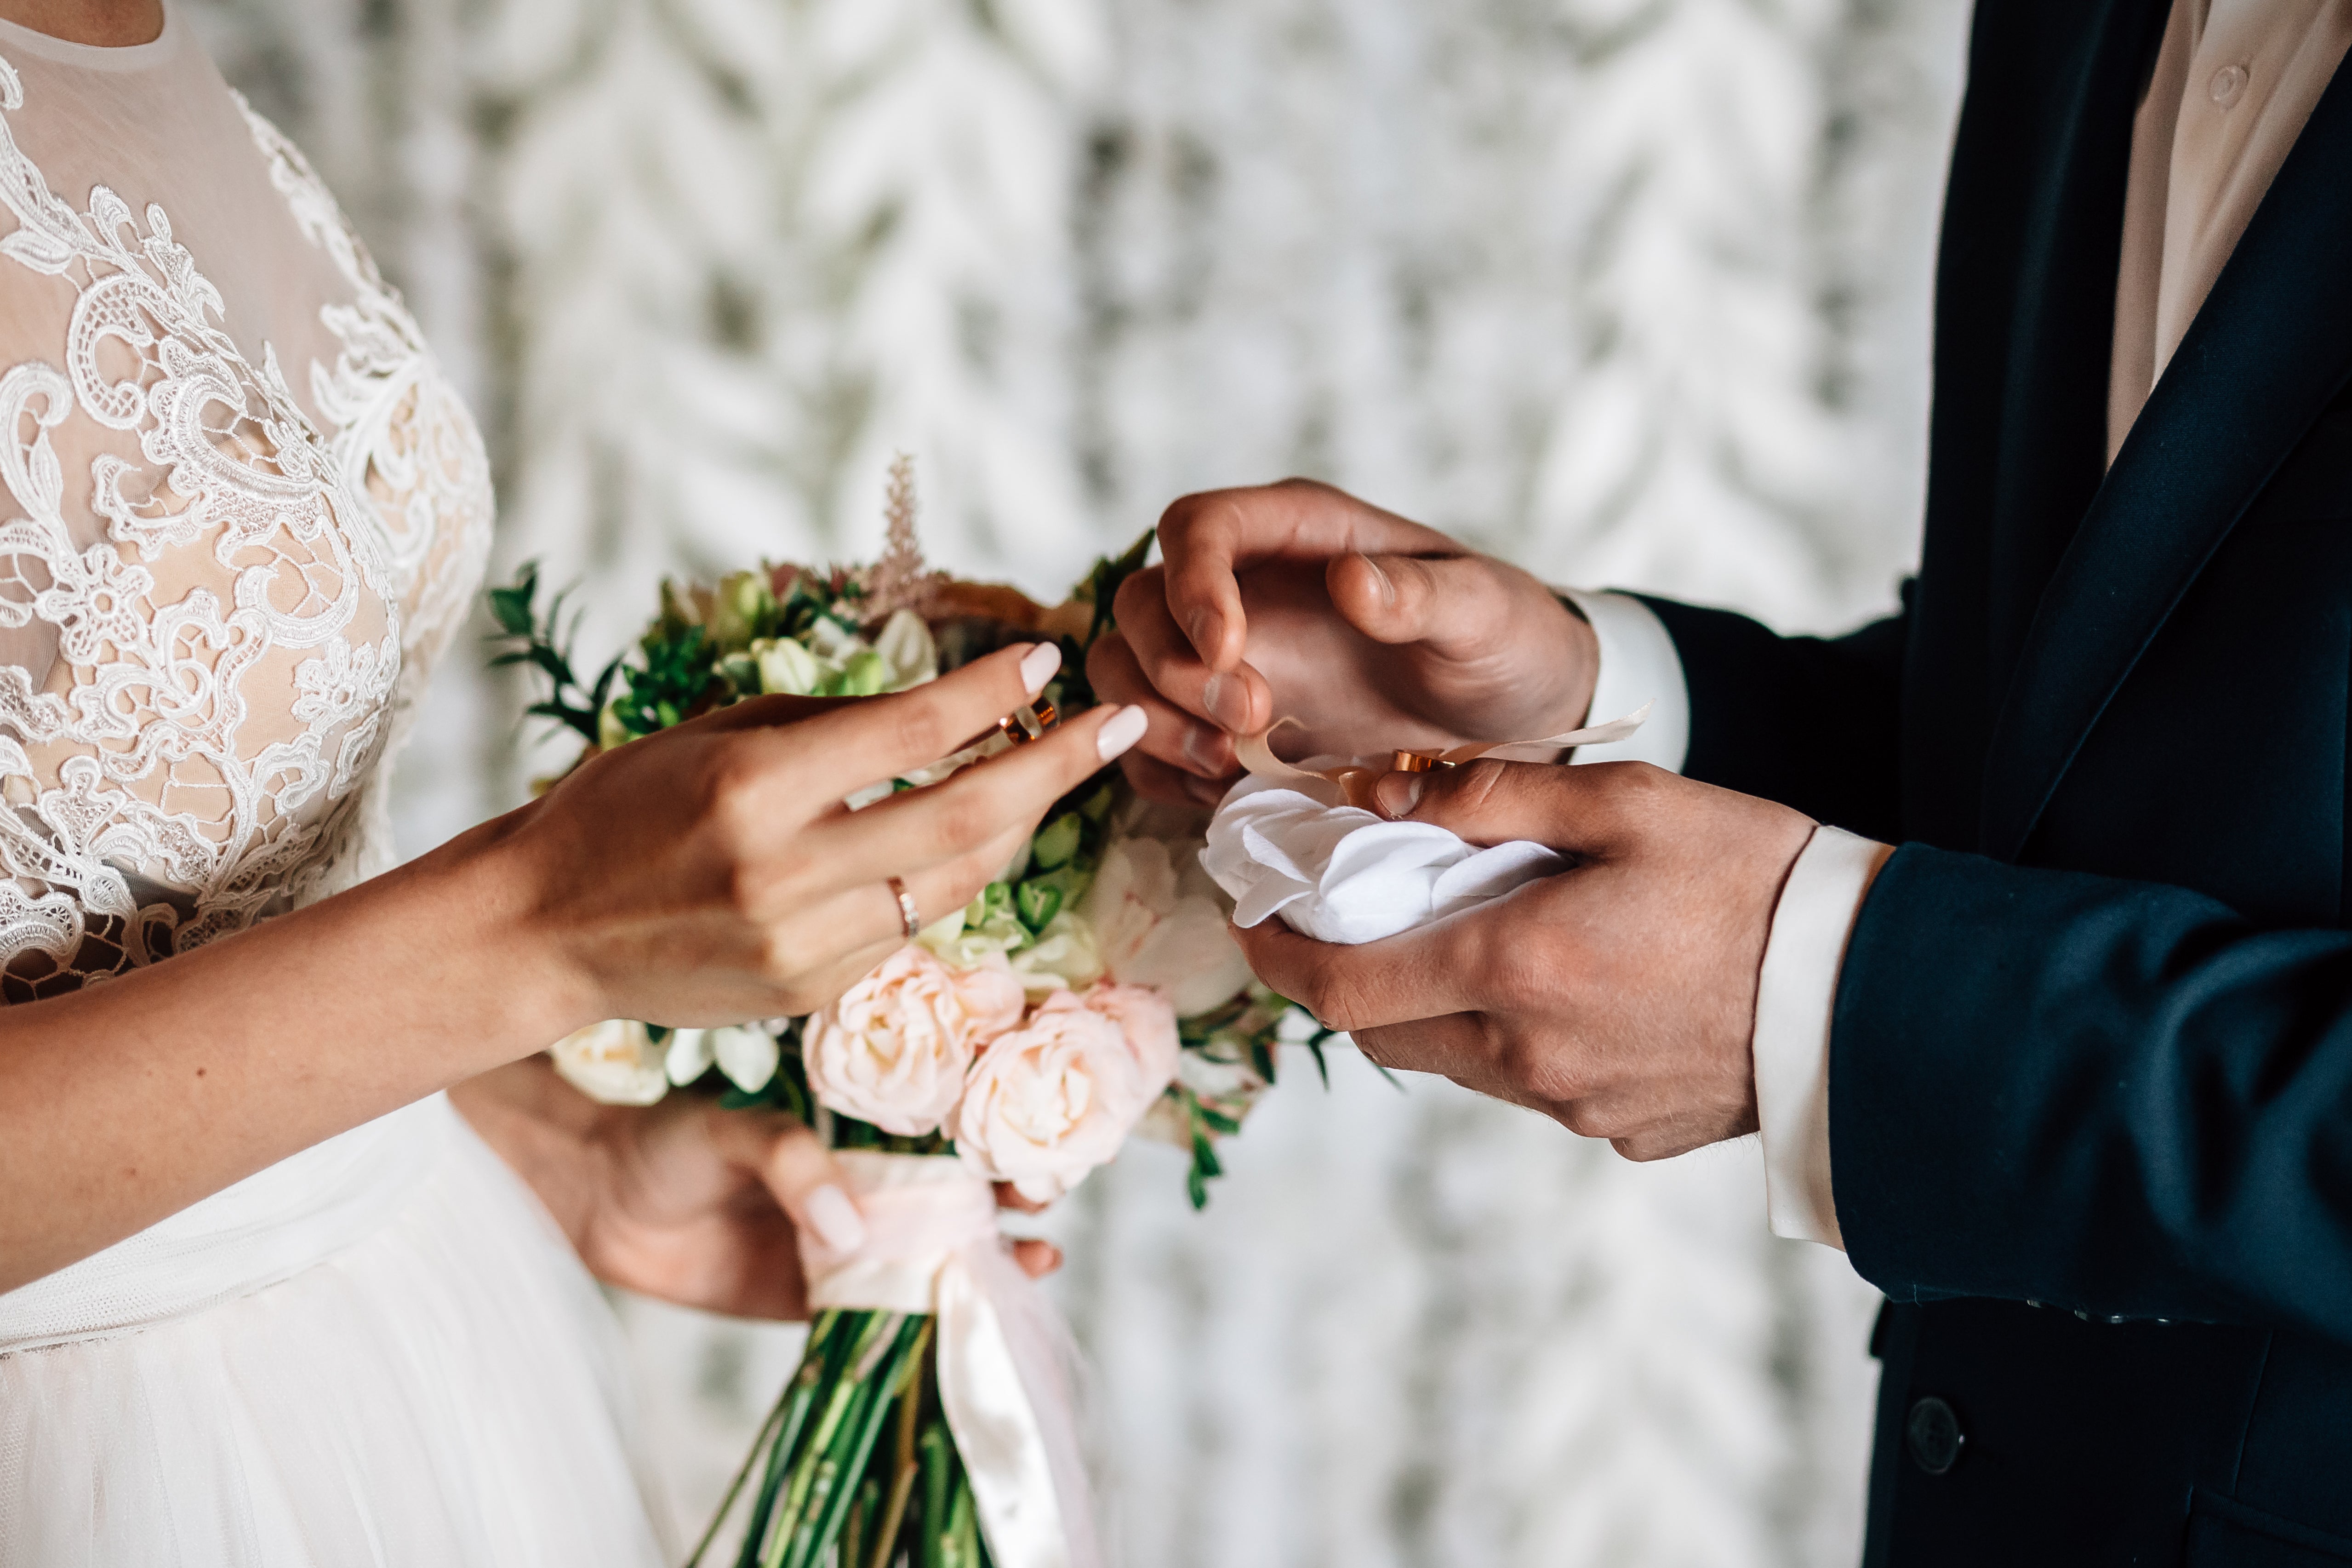 The study found that married men were less likely to die as they had someone close to them keeping tabs on their health, whilst bachelors typically did not.